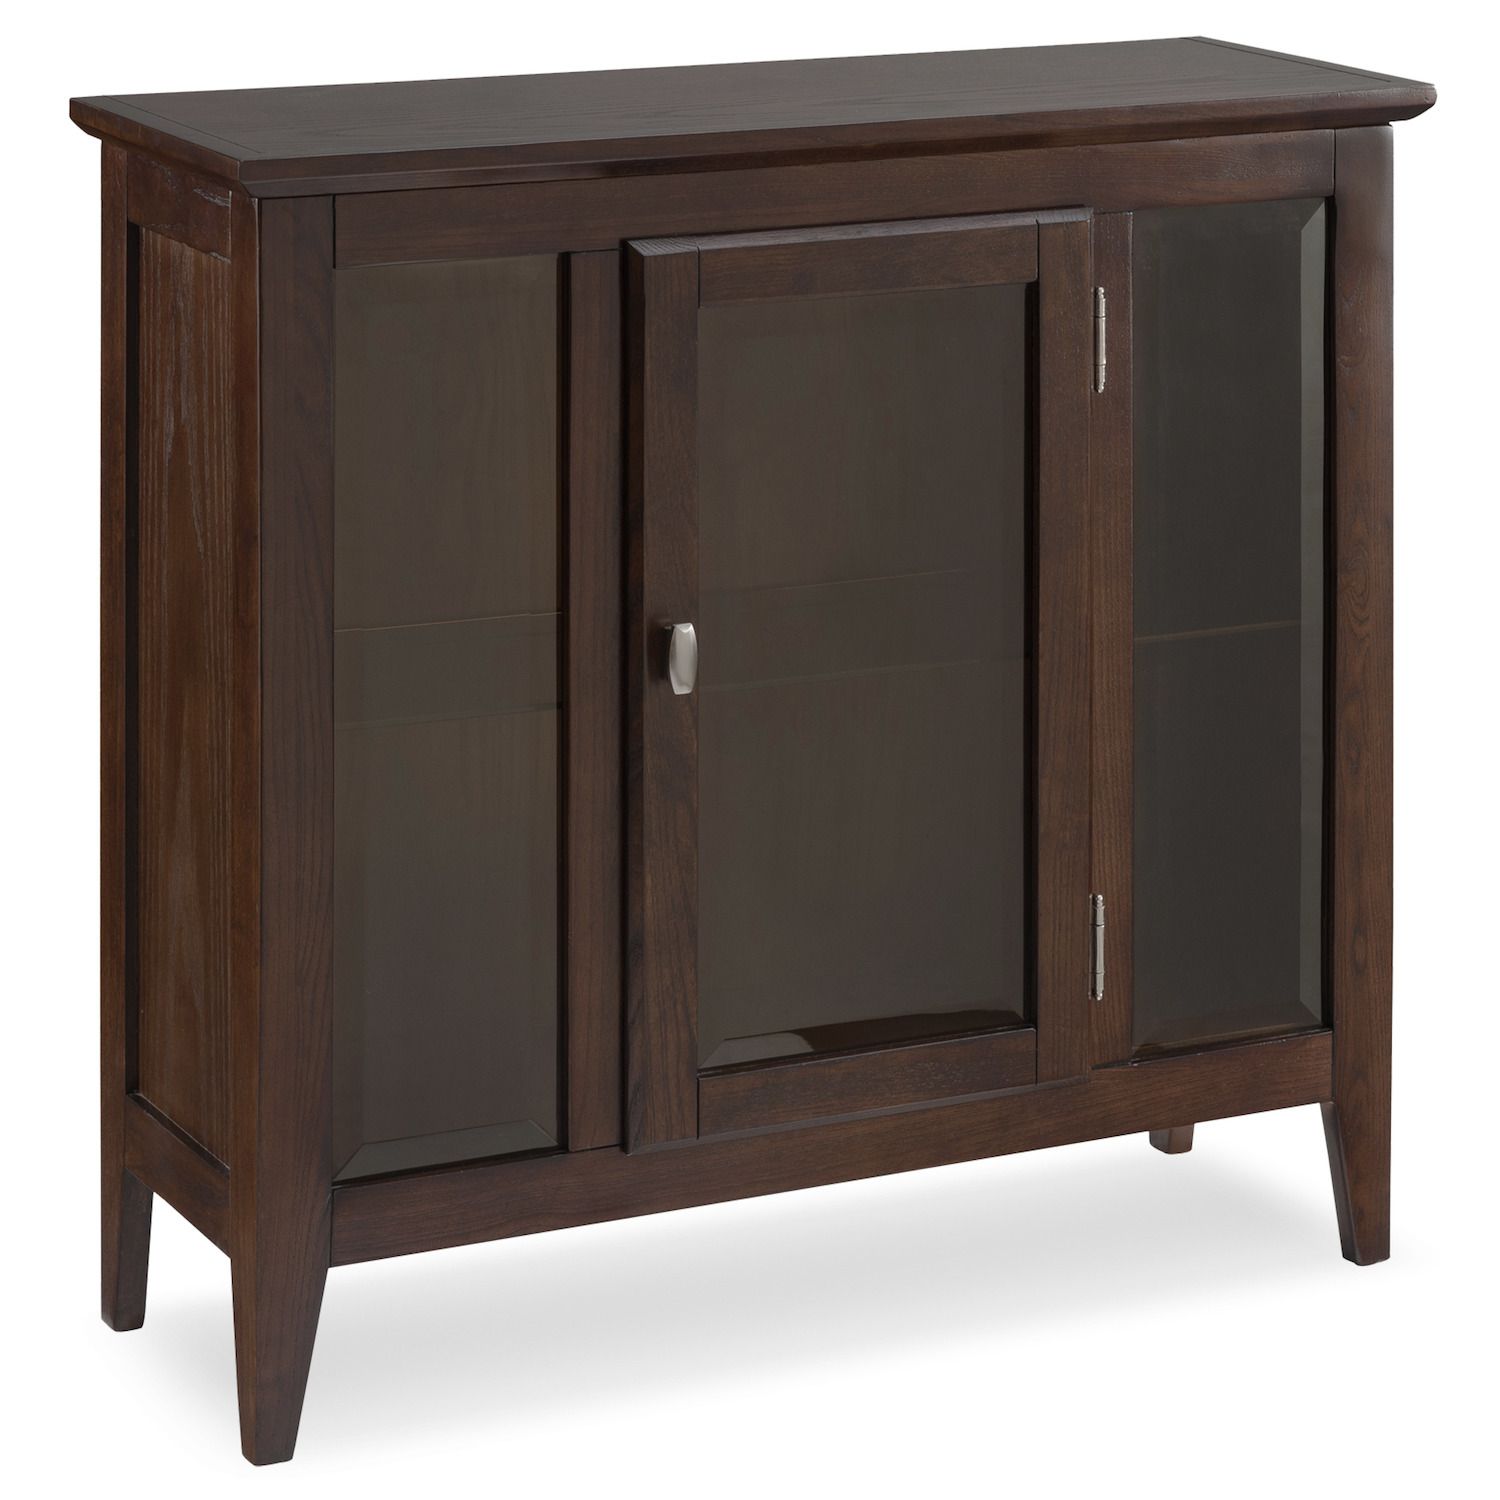 Image for Leick Furniture Entryway Curio Storage Cabinet at Kohl's.